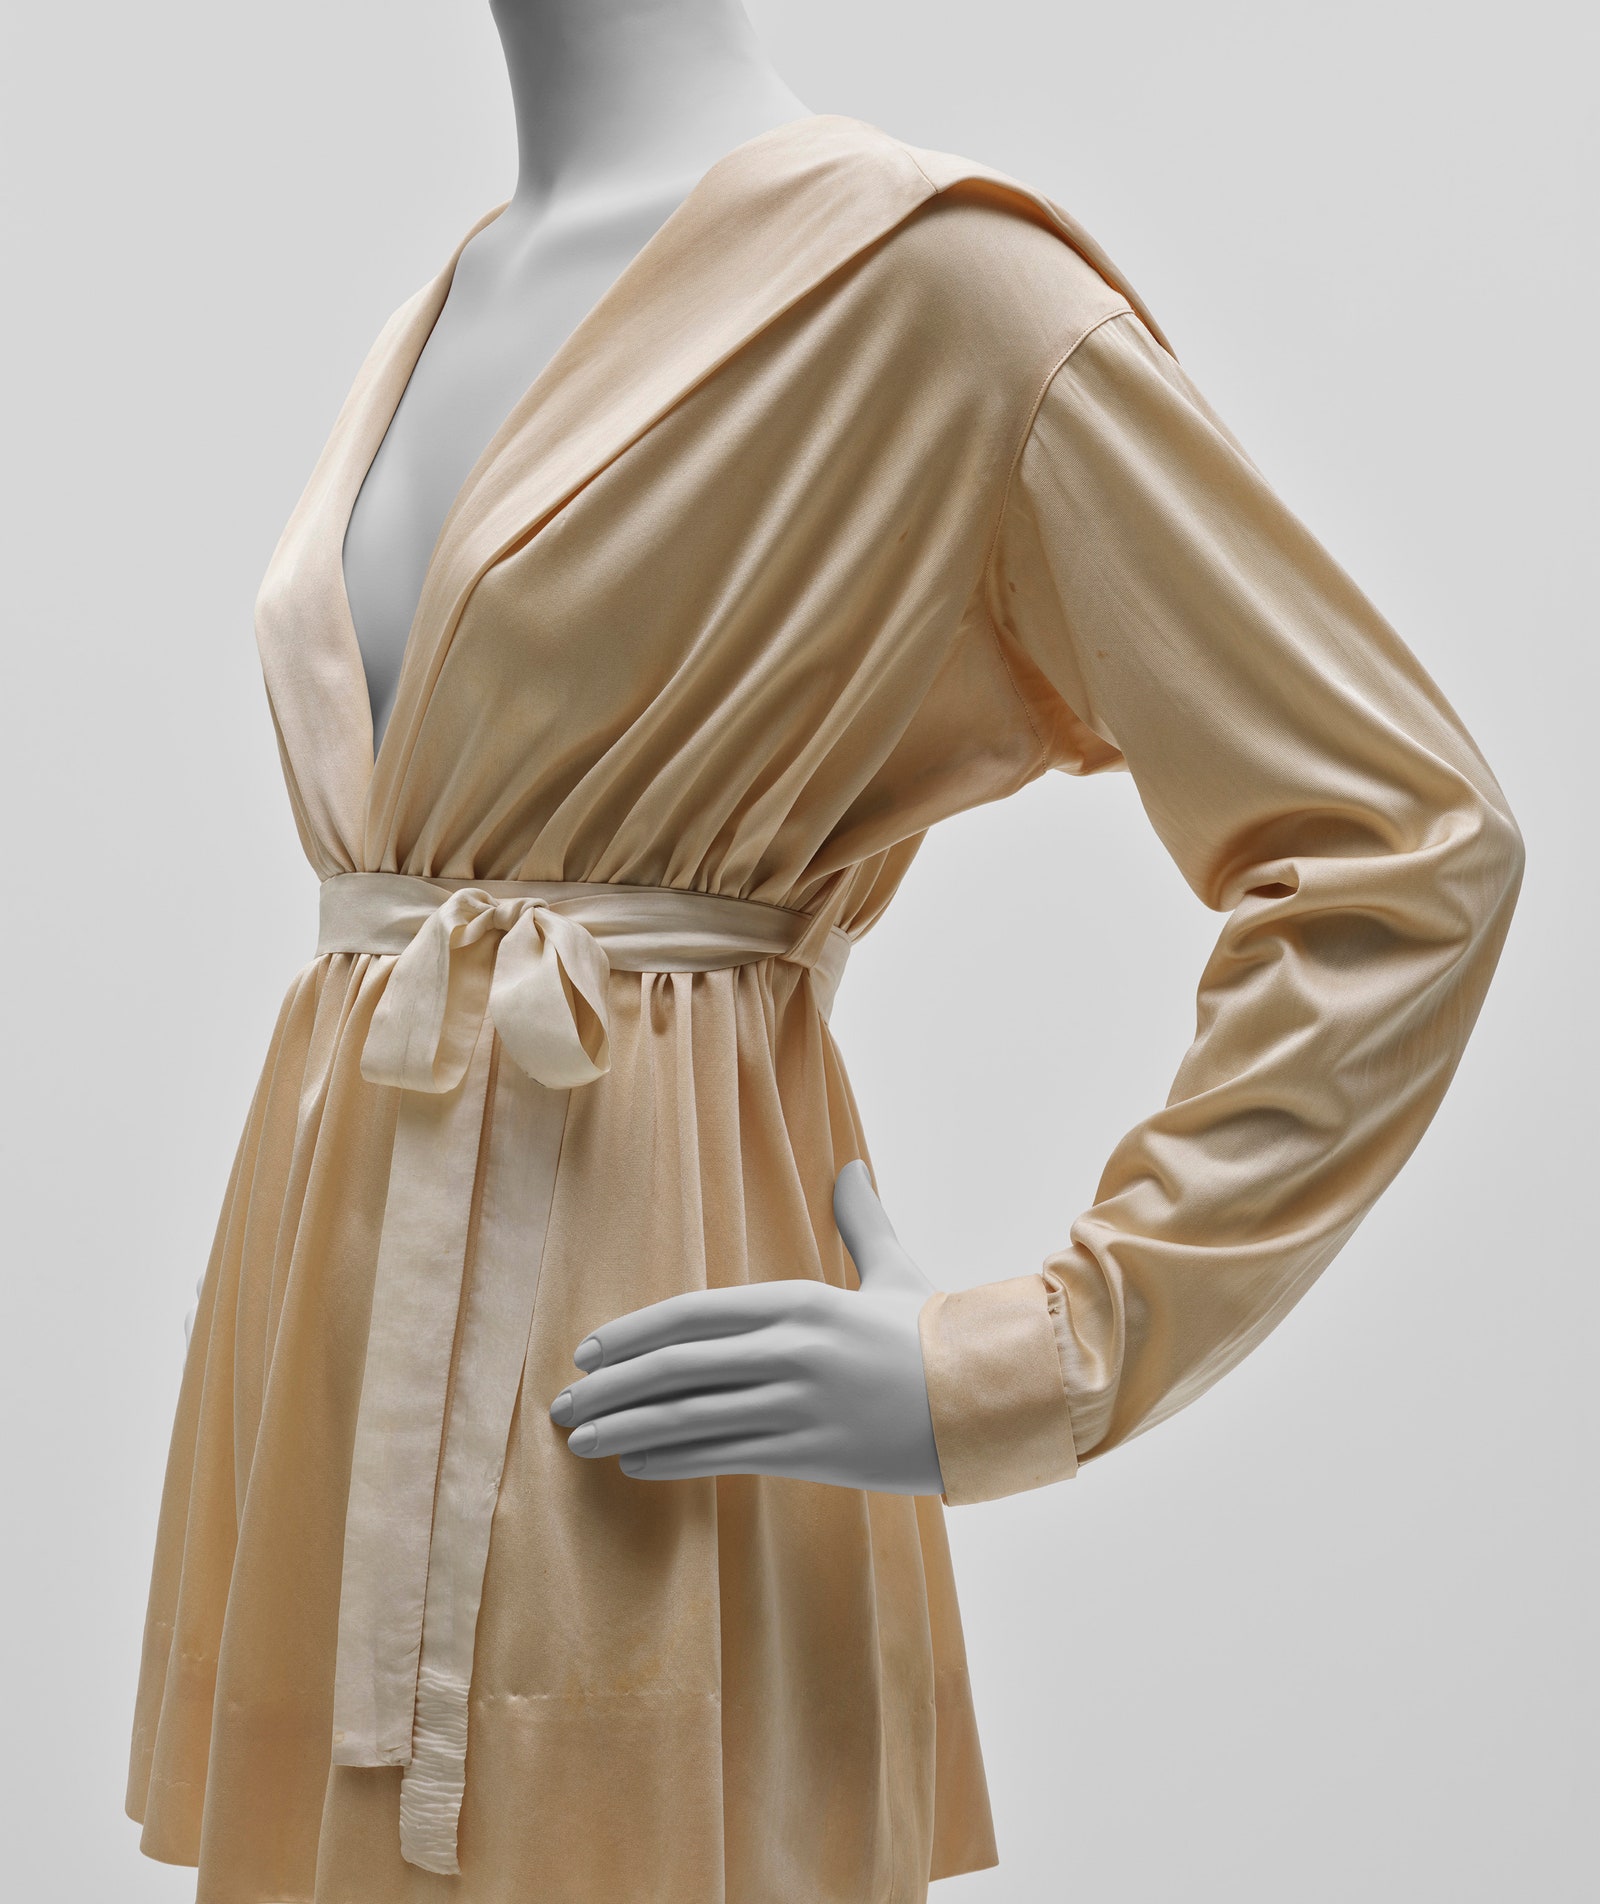 Chanel’s marinière blouse from 1916, one of the brand’s earliest surviving garments and the first piece you see in Gabrielle Chanel.